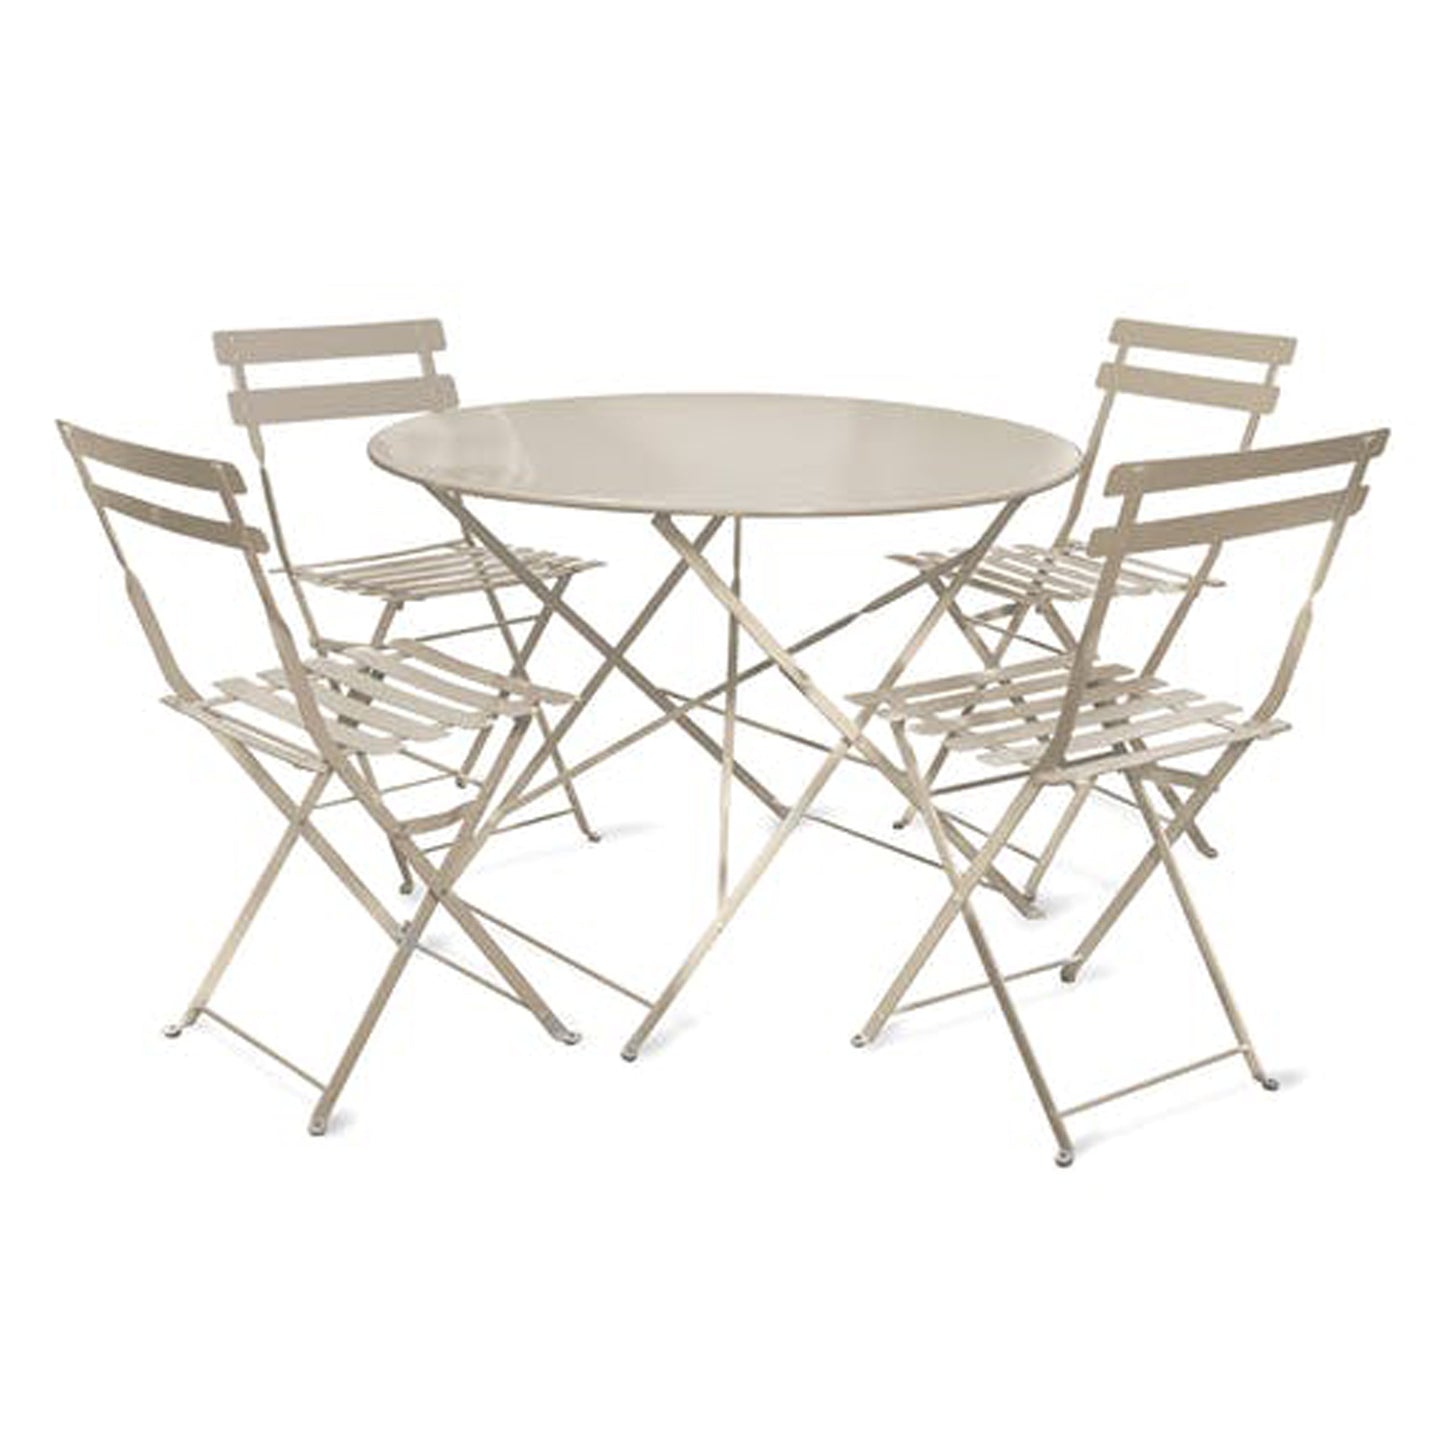 Rive Droite Bistro Outdoor Set Large in Clay Steel by Garden Trading